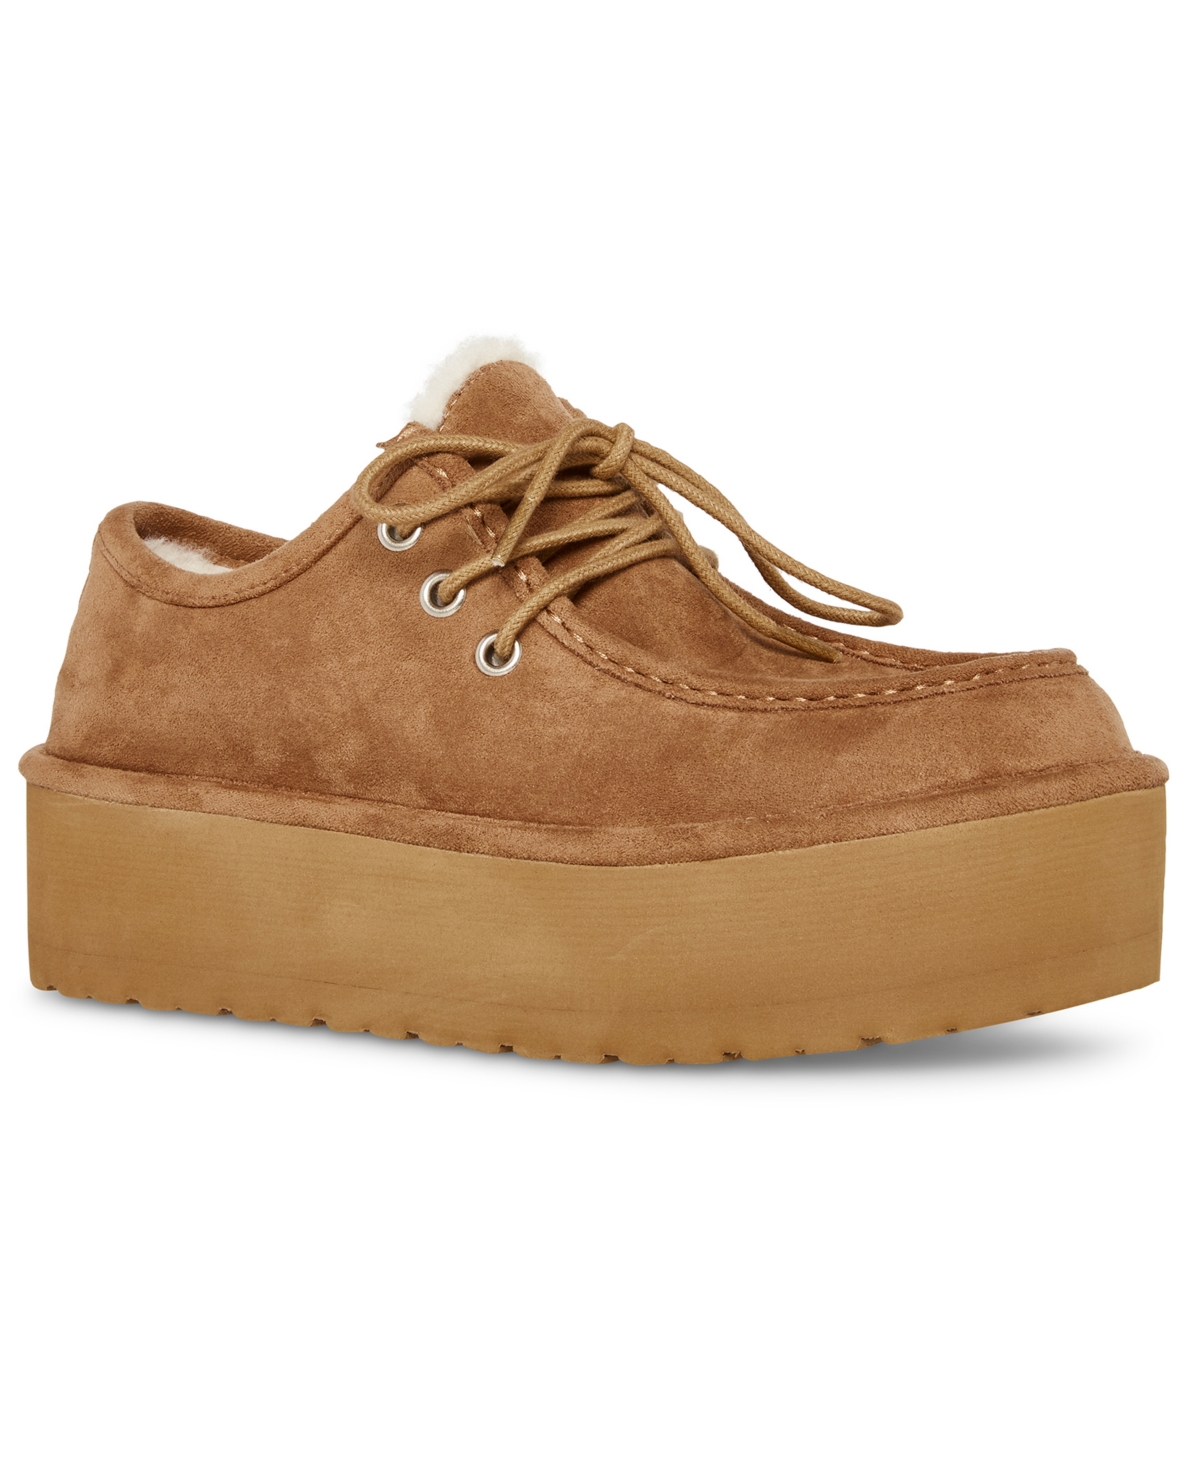 Eager Cozy Lace-Up Platform Moccasin Loafers - Tan